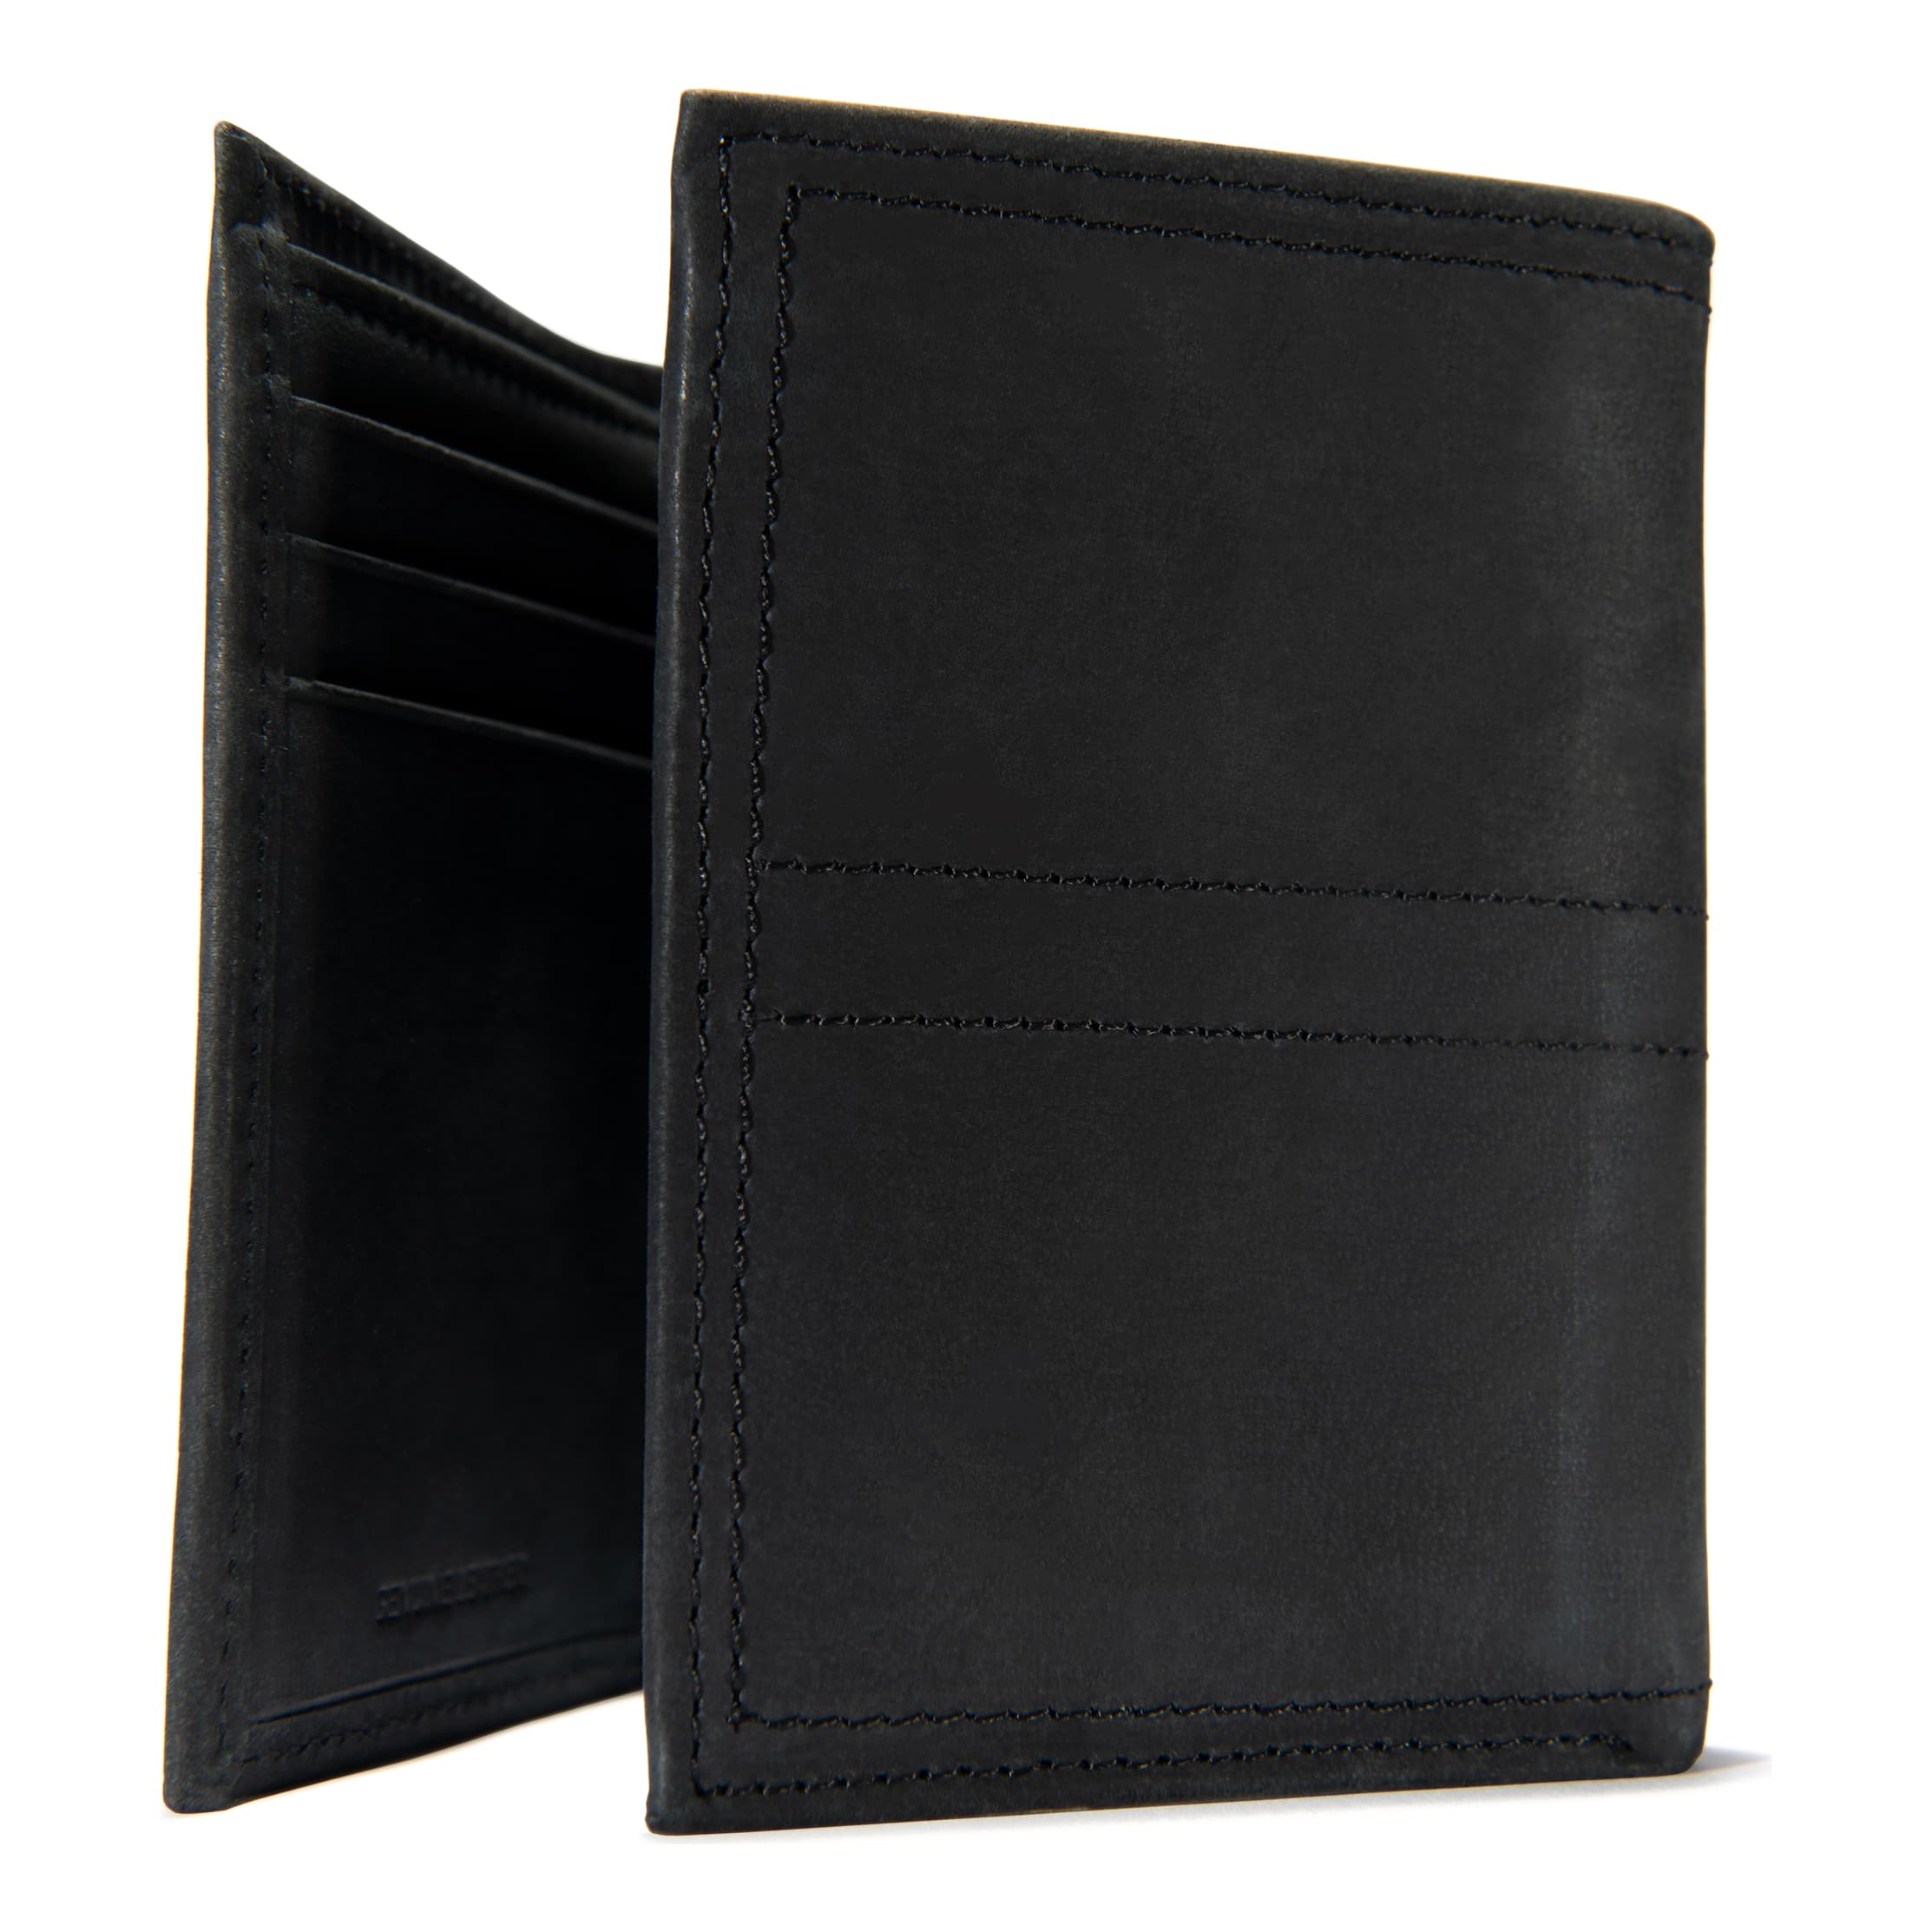 Carhartt Saddle Leather Trifold Wallet – Black